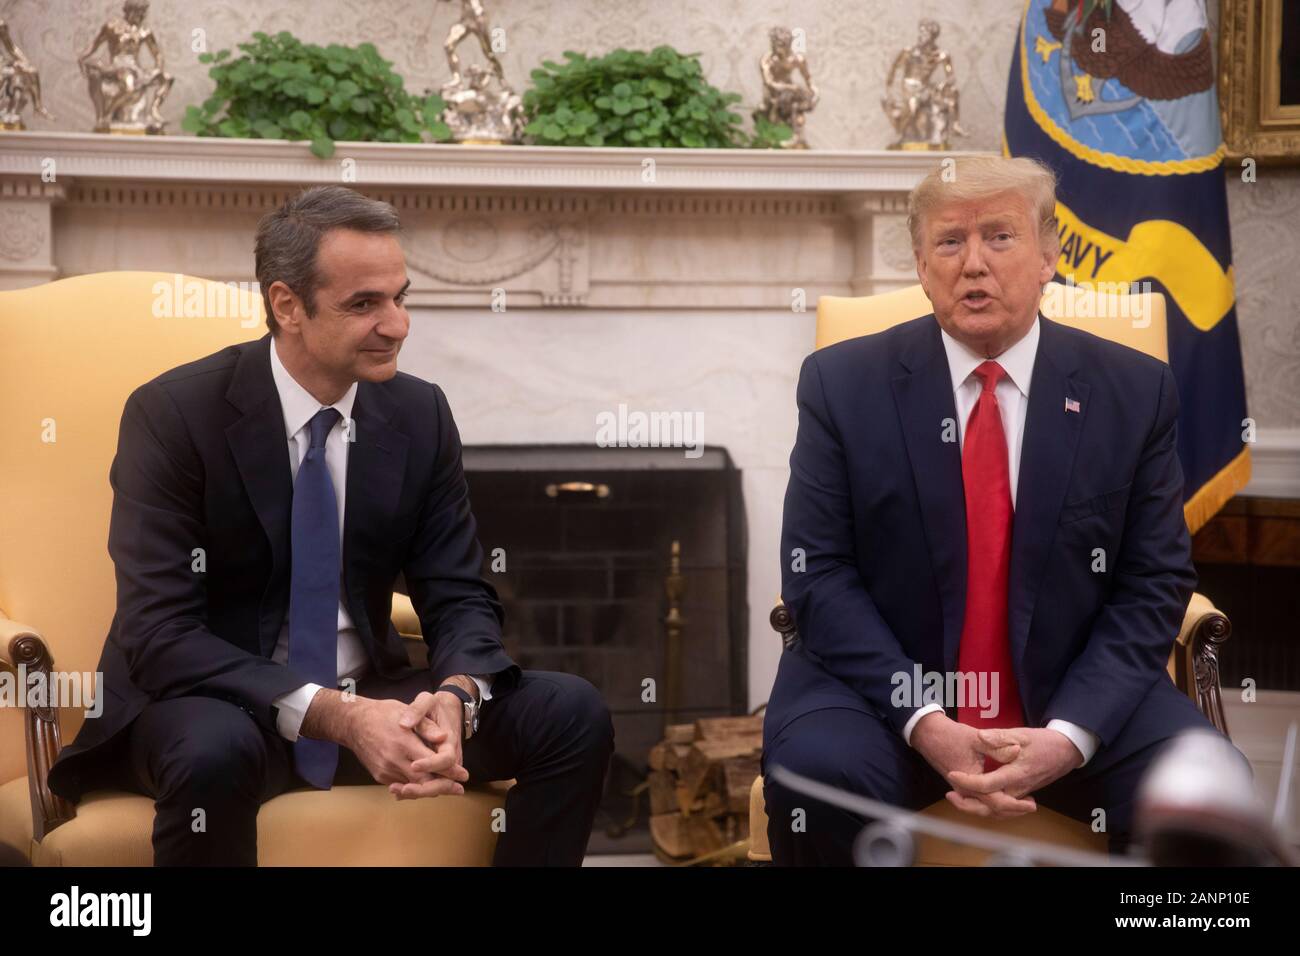 Washington, United States. 07th Jan, 2020. United States President Donald J. Trump, right, makes remarks as he greets Prime Minister Kyriakos Mitsotakis of Greece, left, in the Oval Office of the White House in Washington, DC on Tuesday, January 7, 2020. Credit: Tasos Katopodis/Pool via CNP/AdMedia/Newscom/Alamy Live News Stock Photo